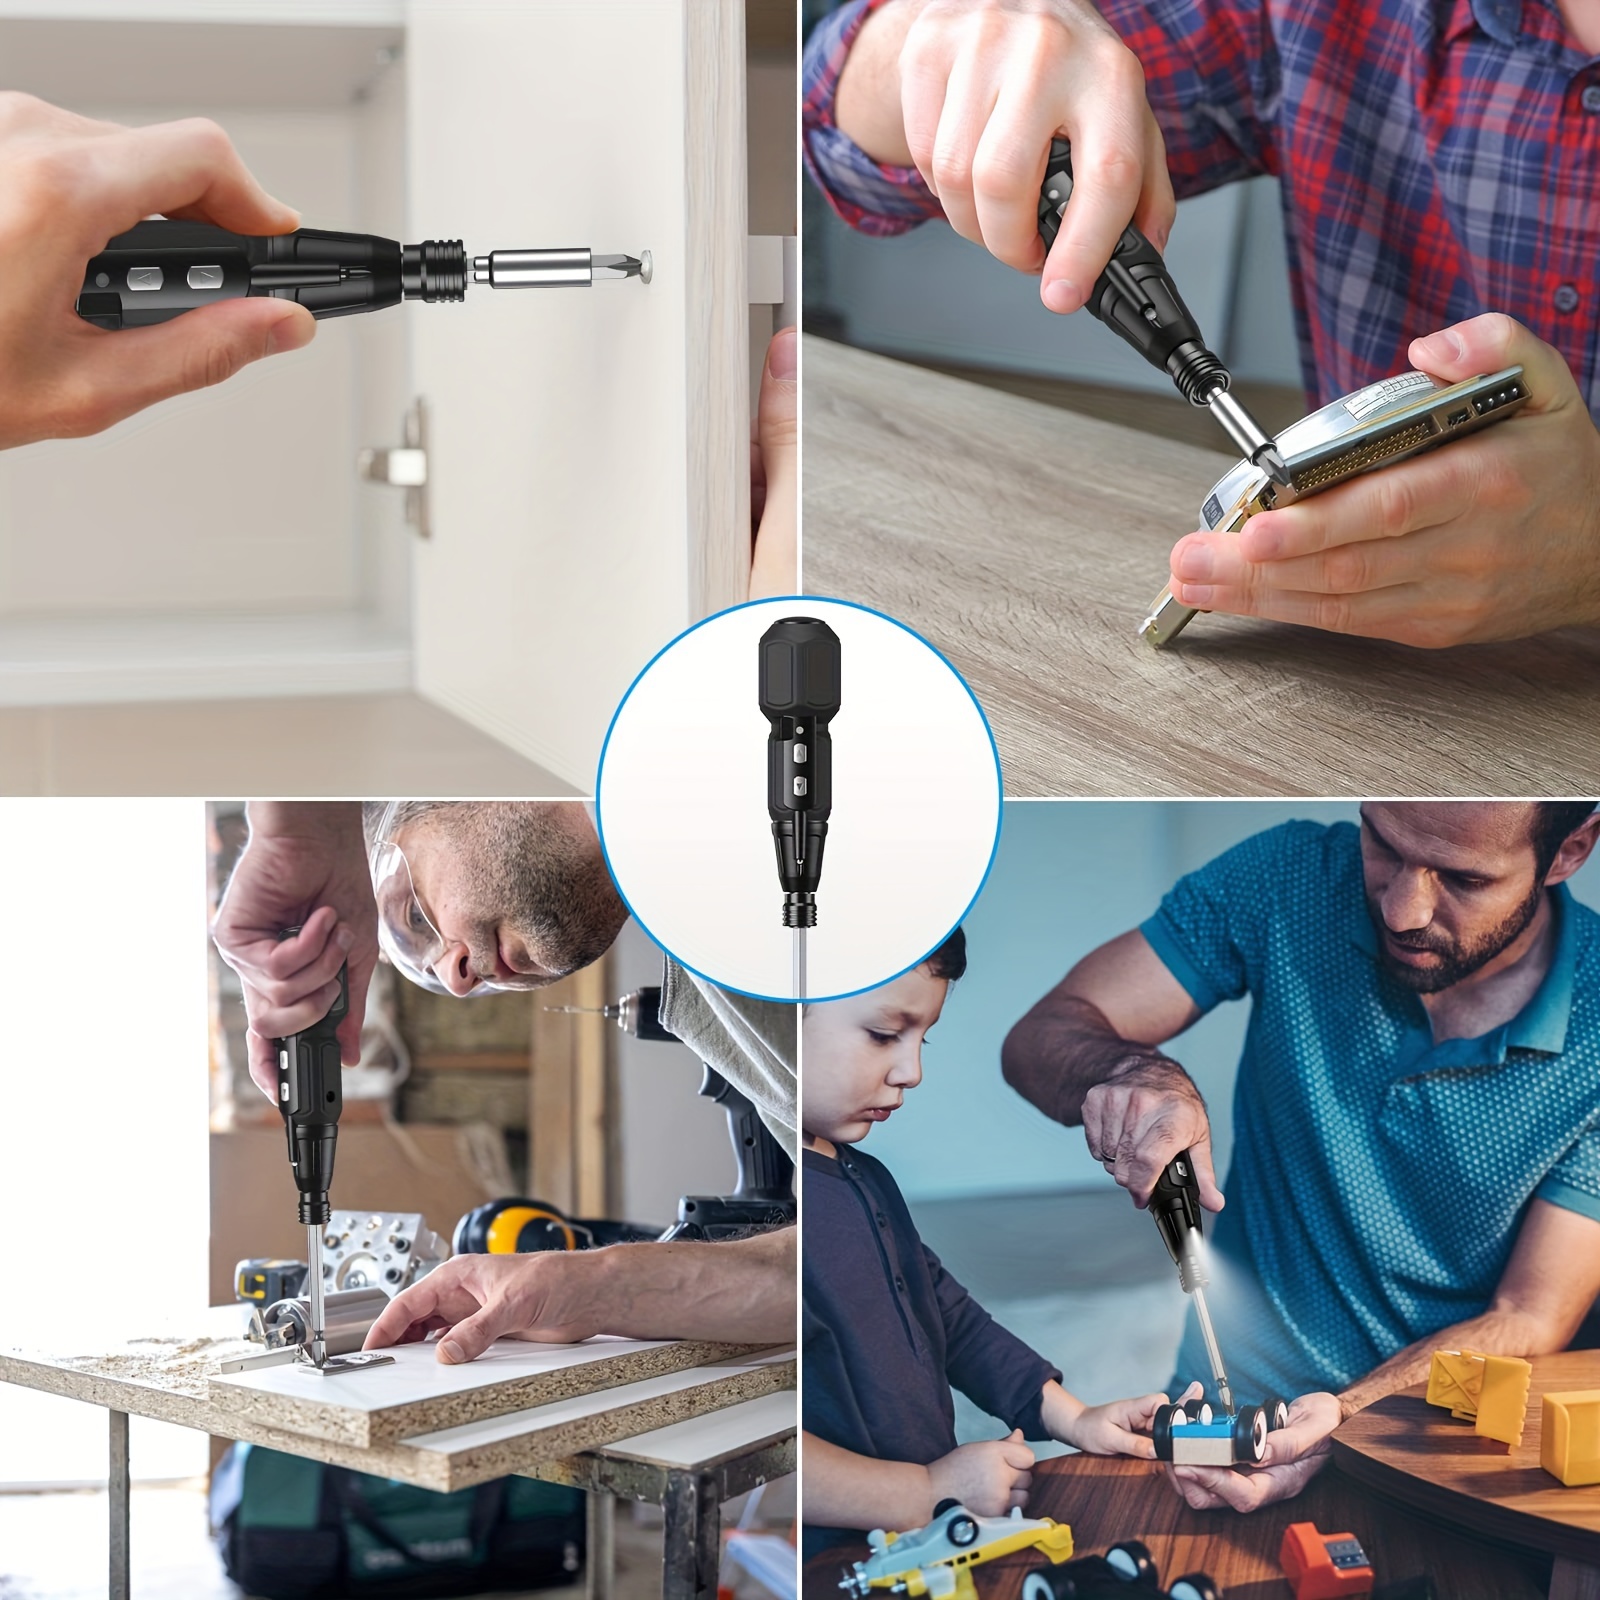 Rechargeable Electric Screwdriver